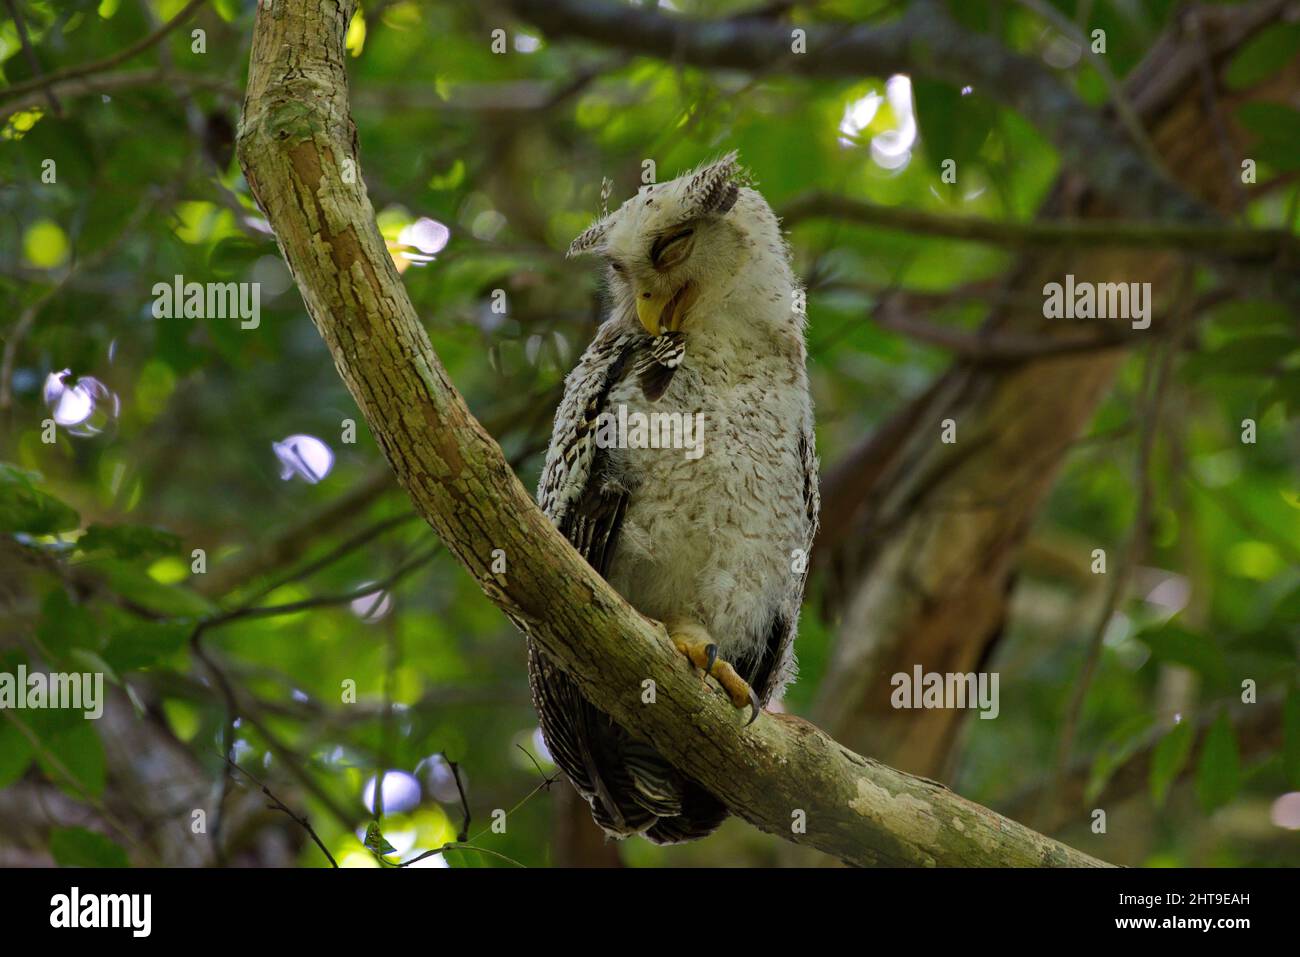 Adult and juvenile Owls birds of prey perched in trees Stock Photo